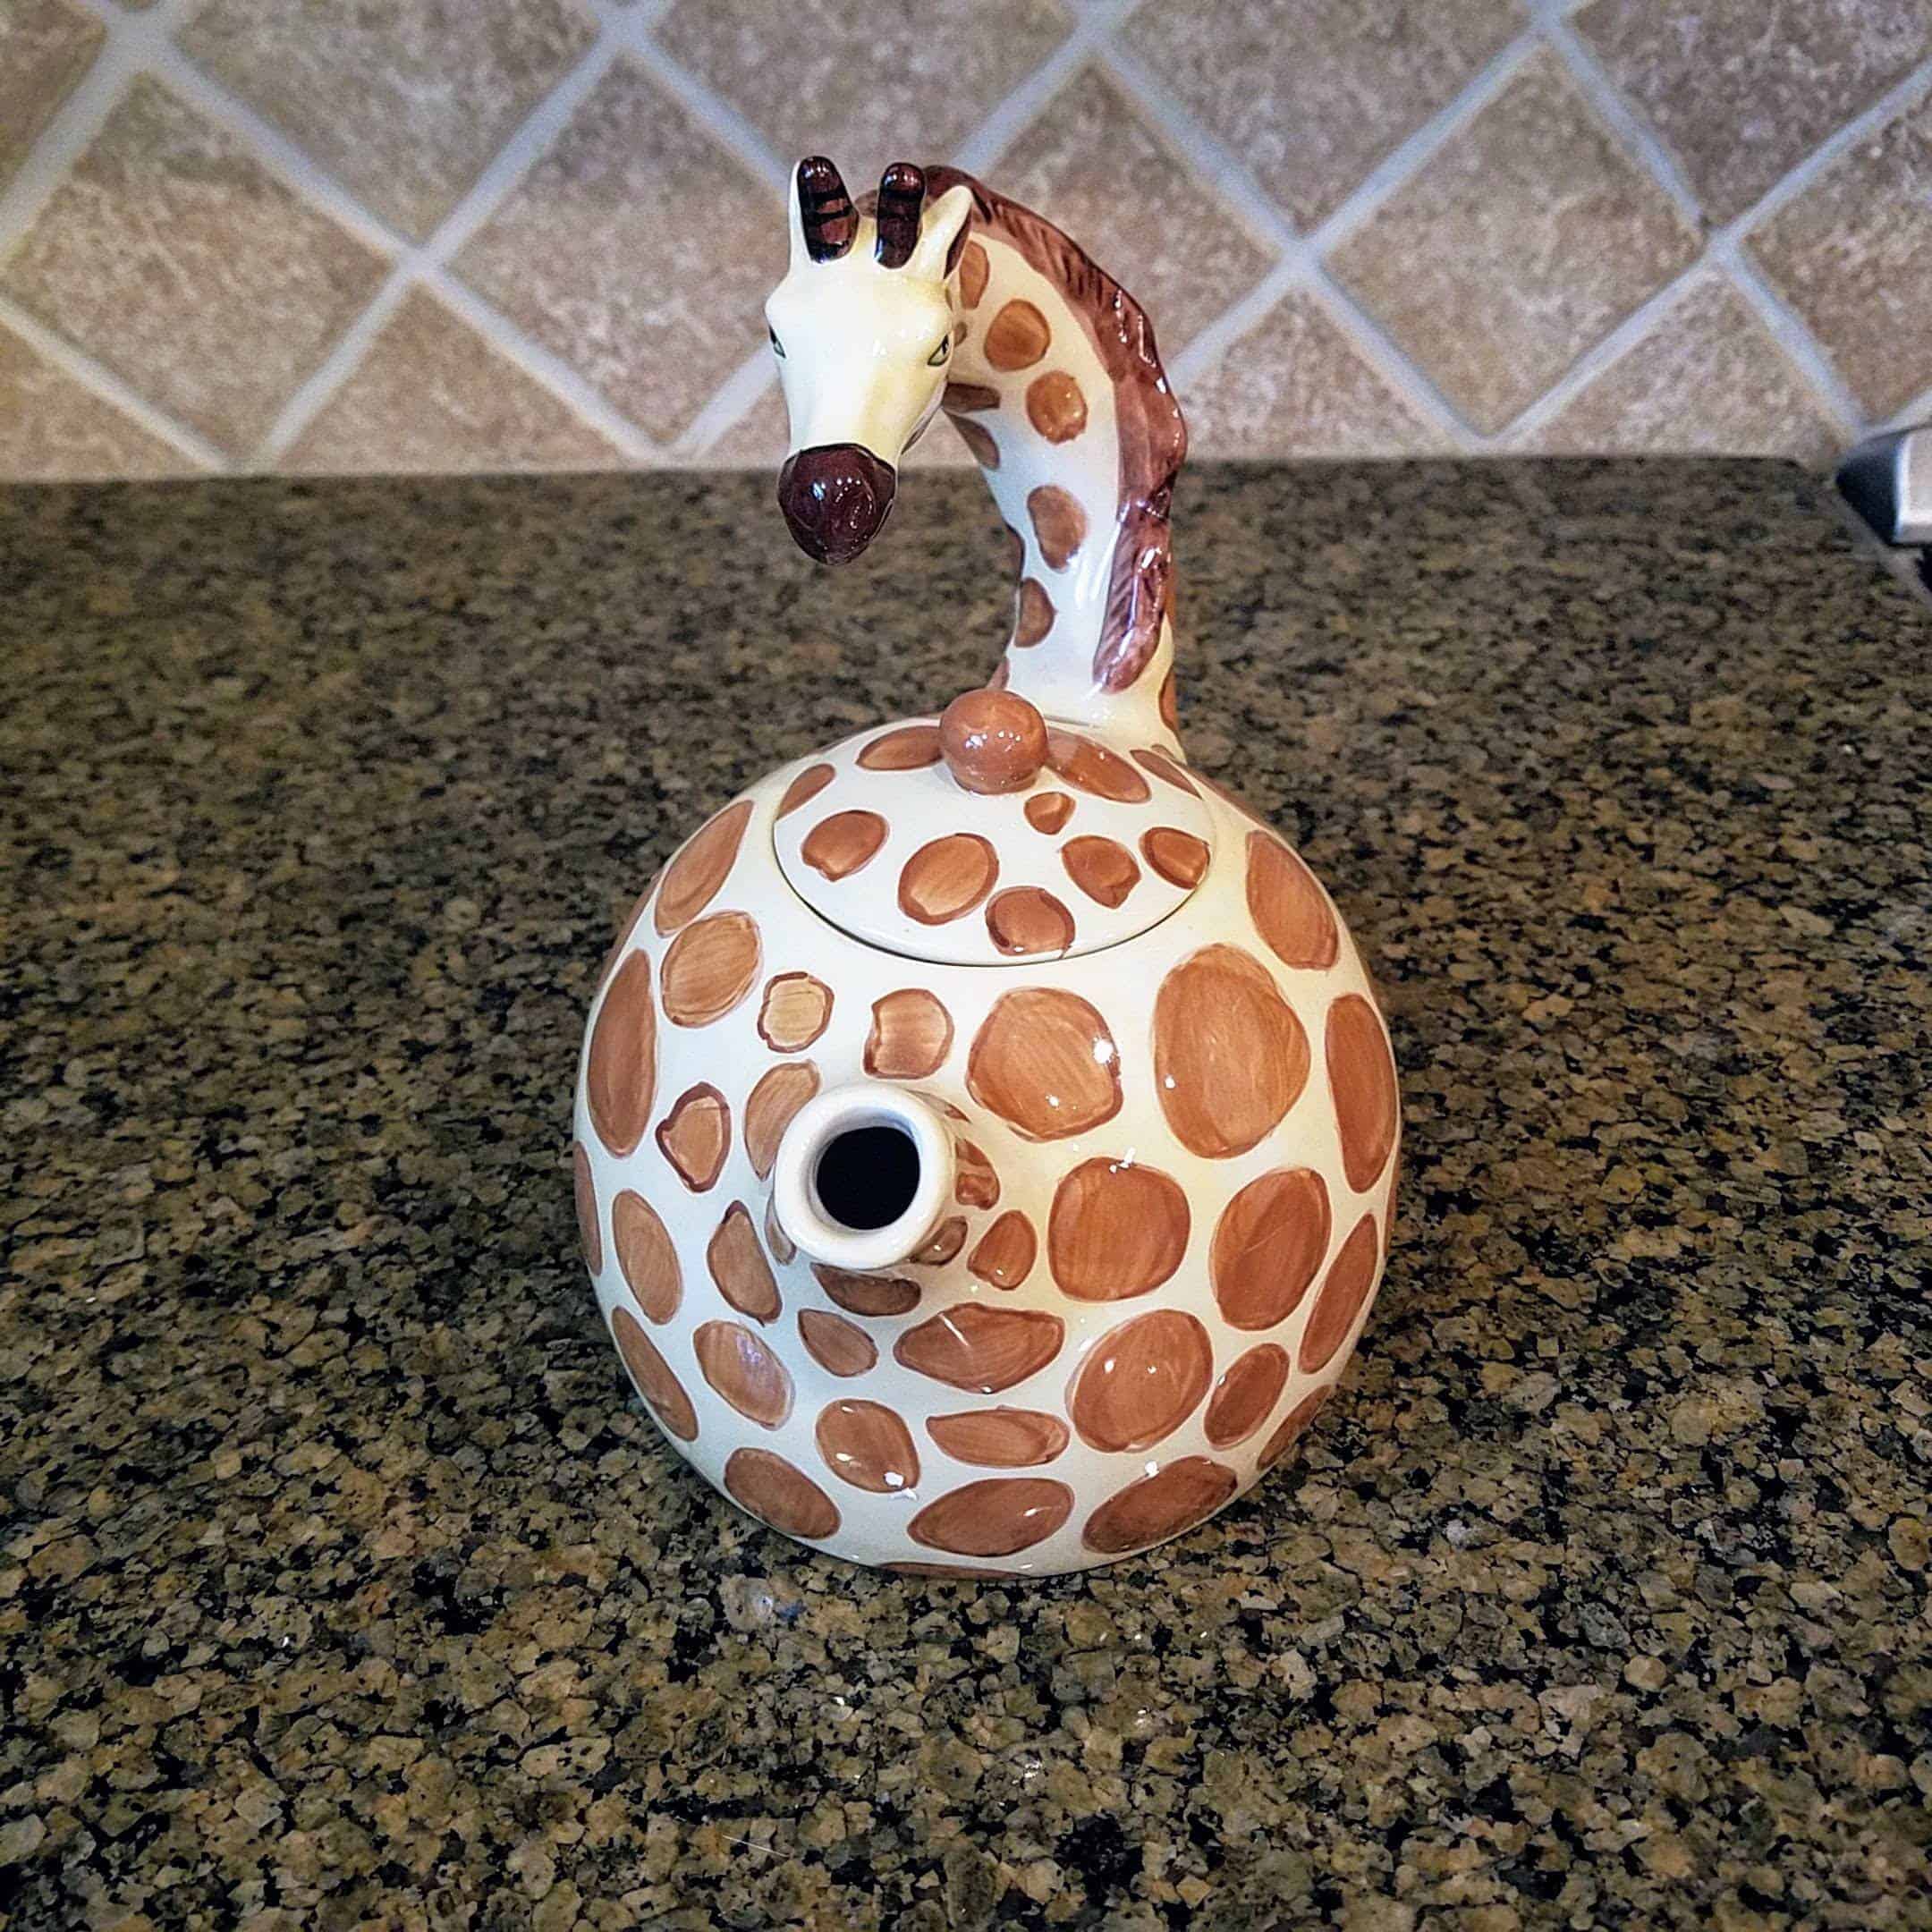 This Giraffe Teapot is made with love by Premier Homegoods! Shop more unique gift ideas today with Spots Initiatives, the best way to support creators.